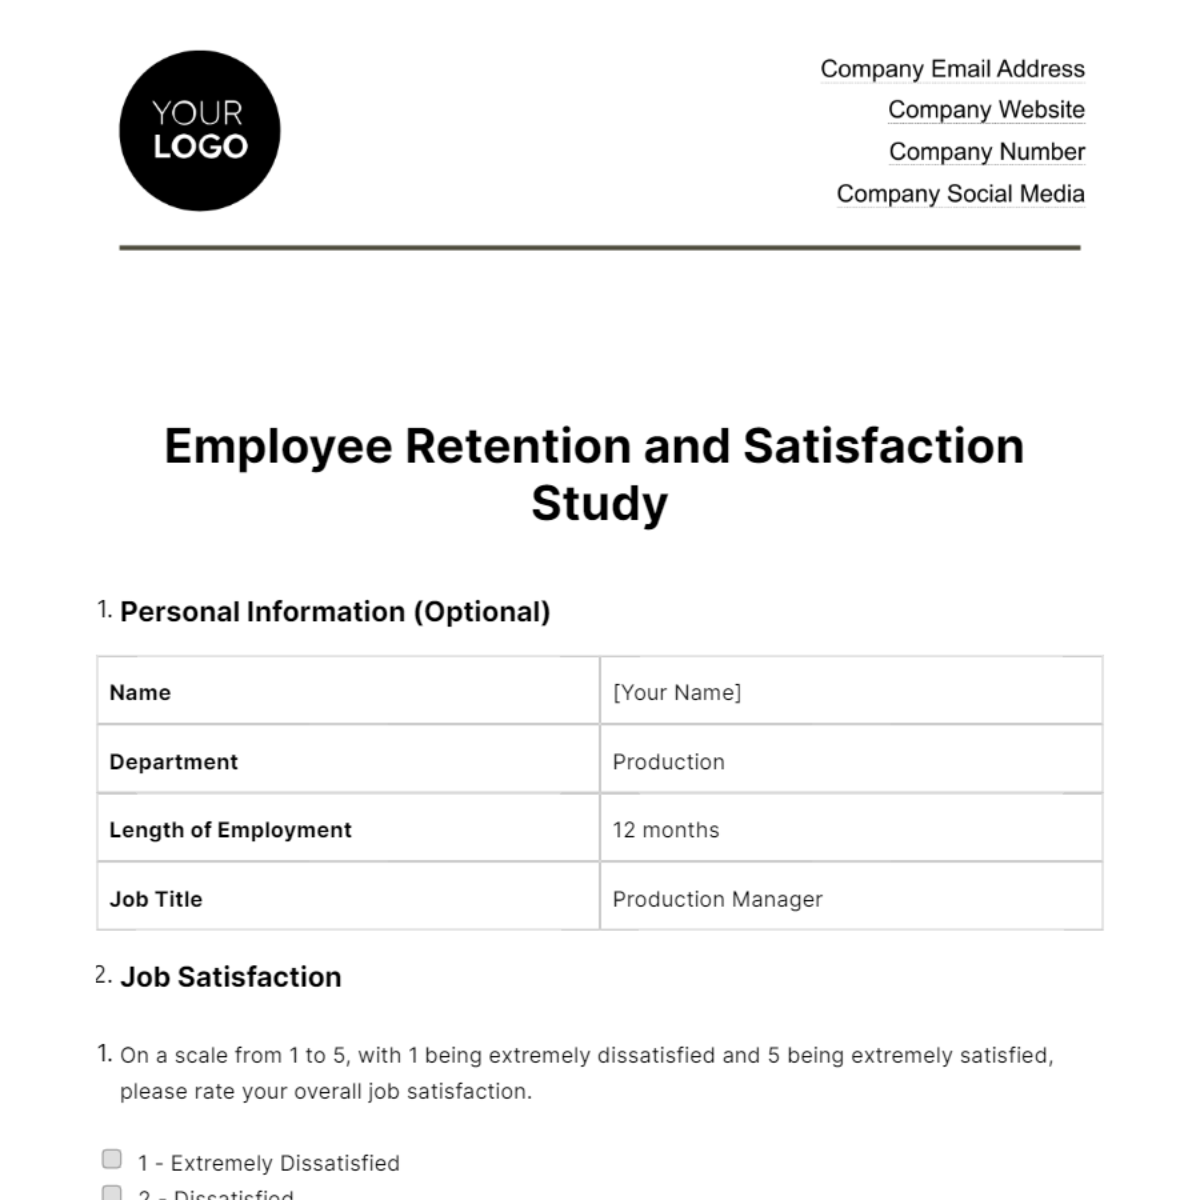 Free Employee Retention and Satisfaction Study HR Template